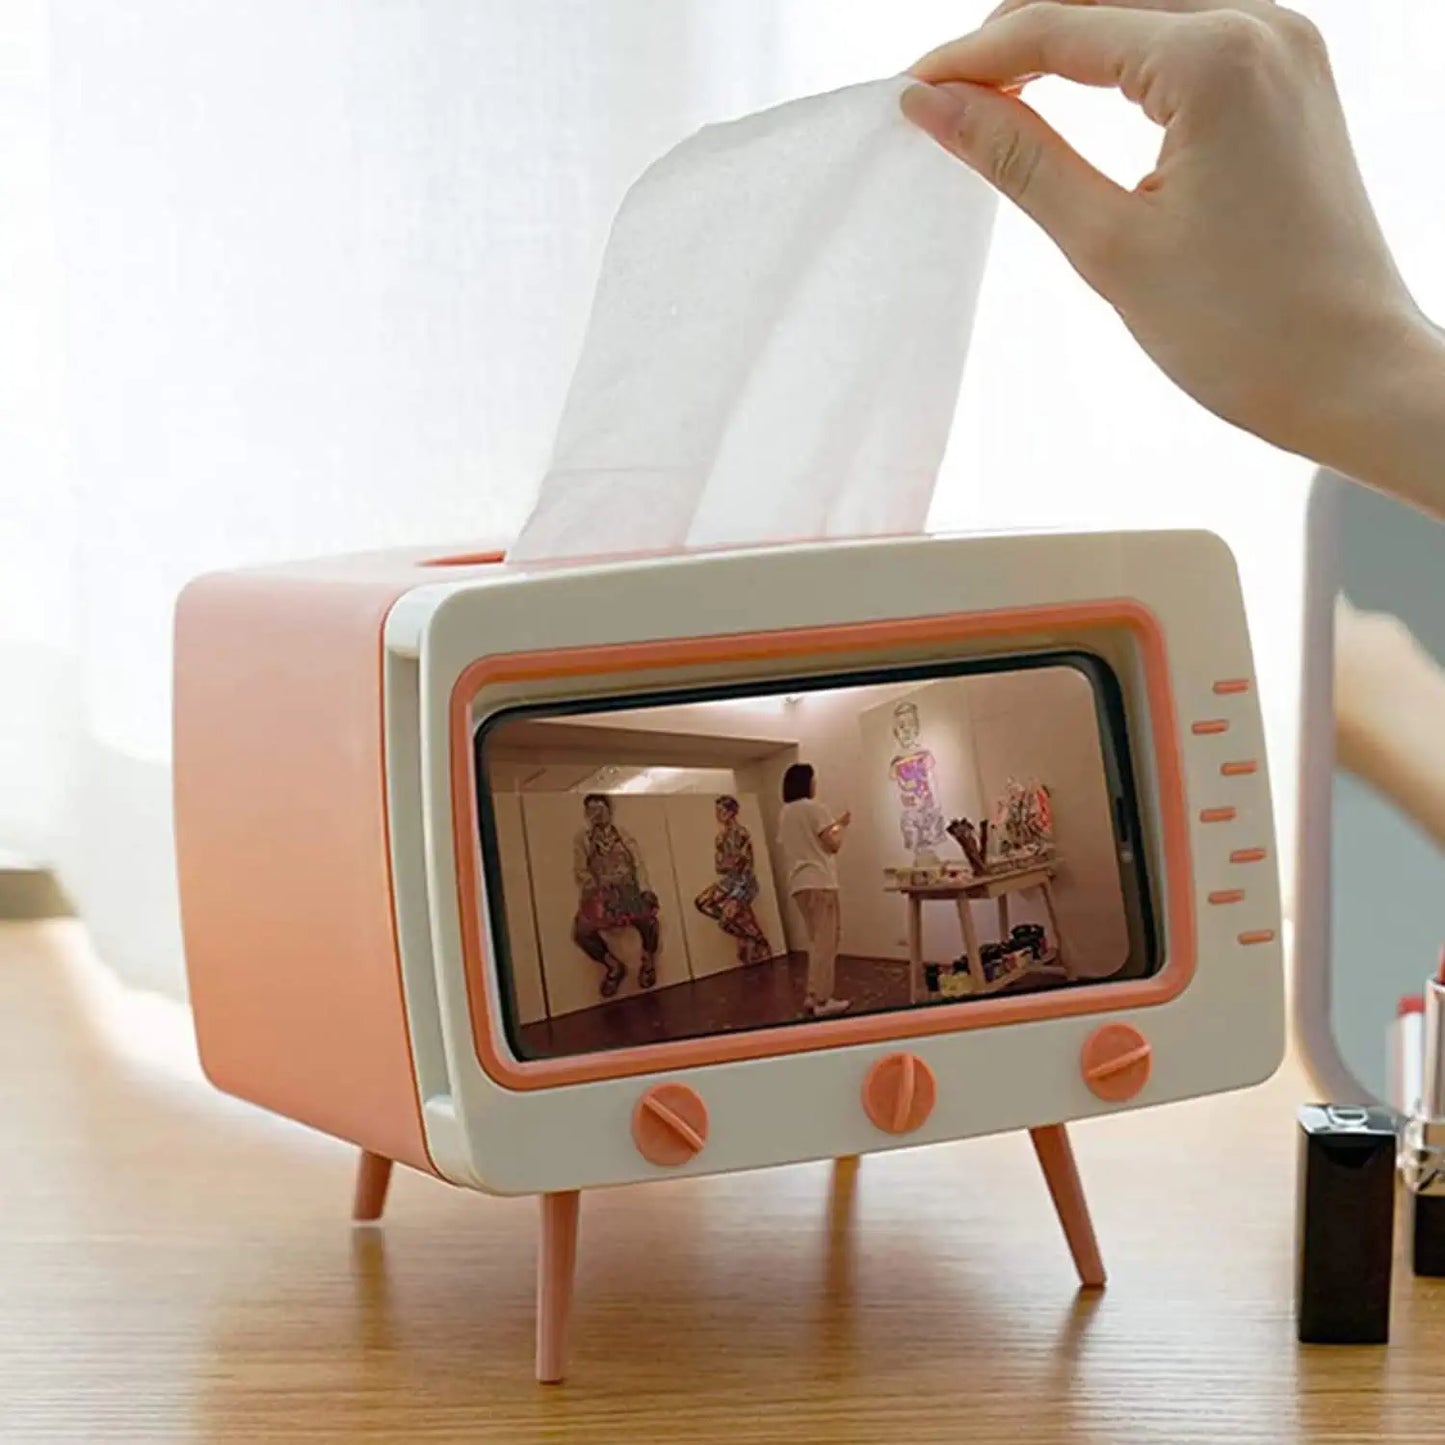 A tissue box which is shaped like a Tv and get hold your phone is you can watch videos. A hand is pulling a tissue out of the top of it.